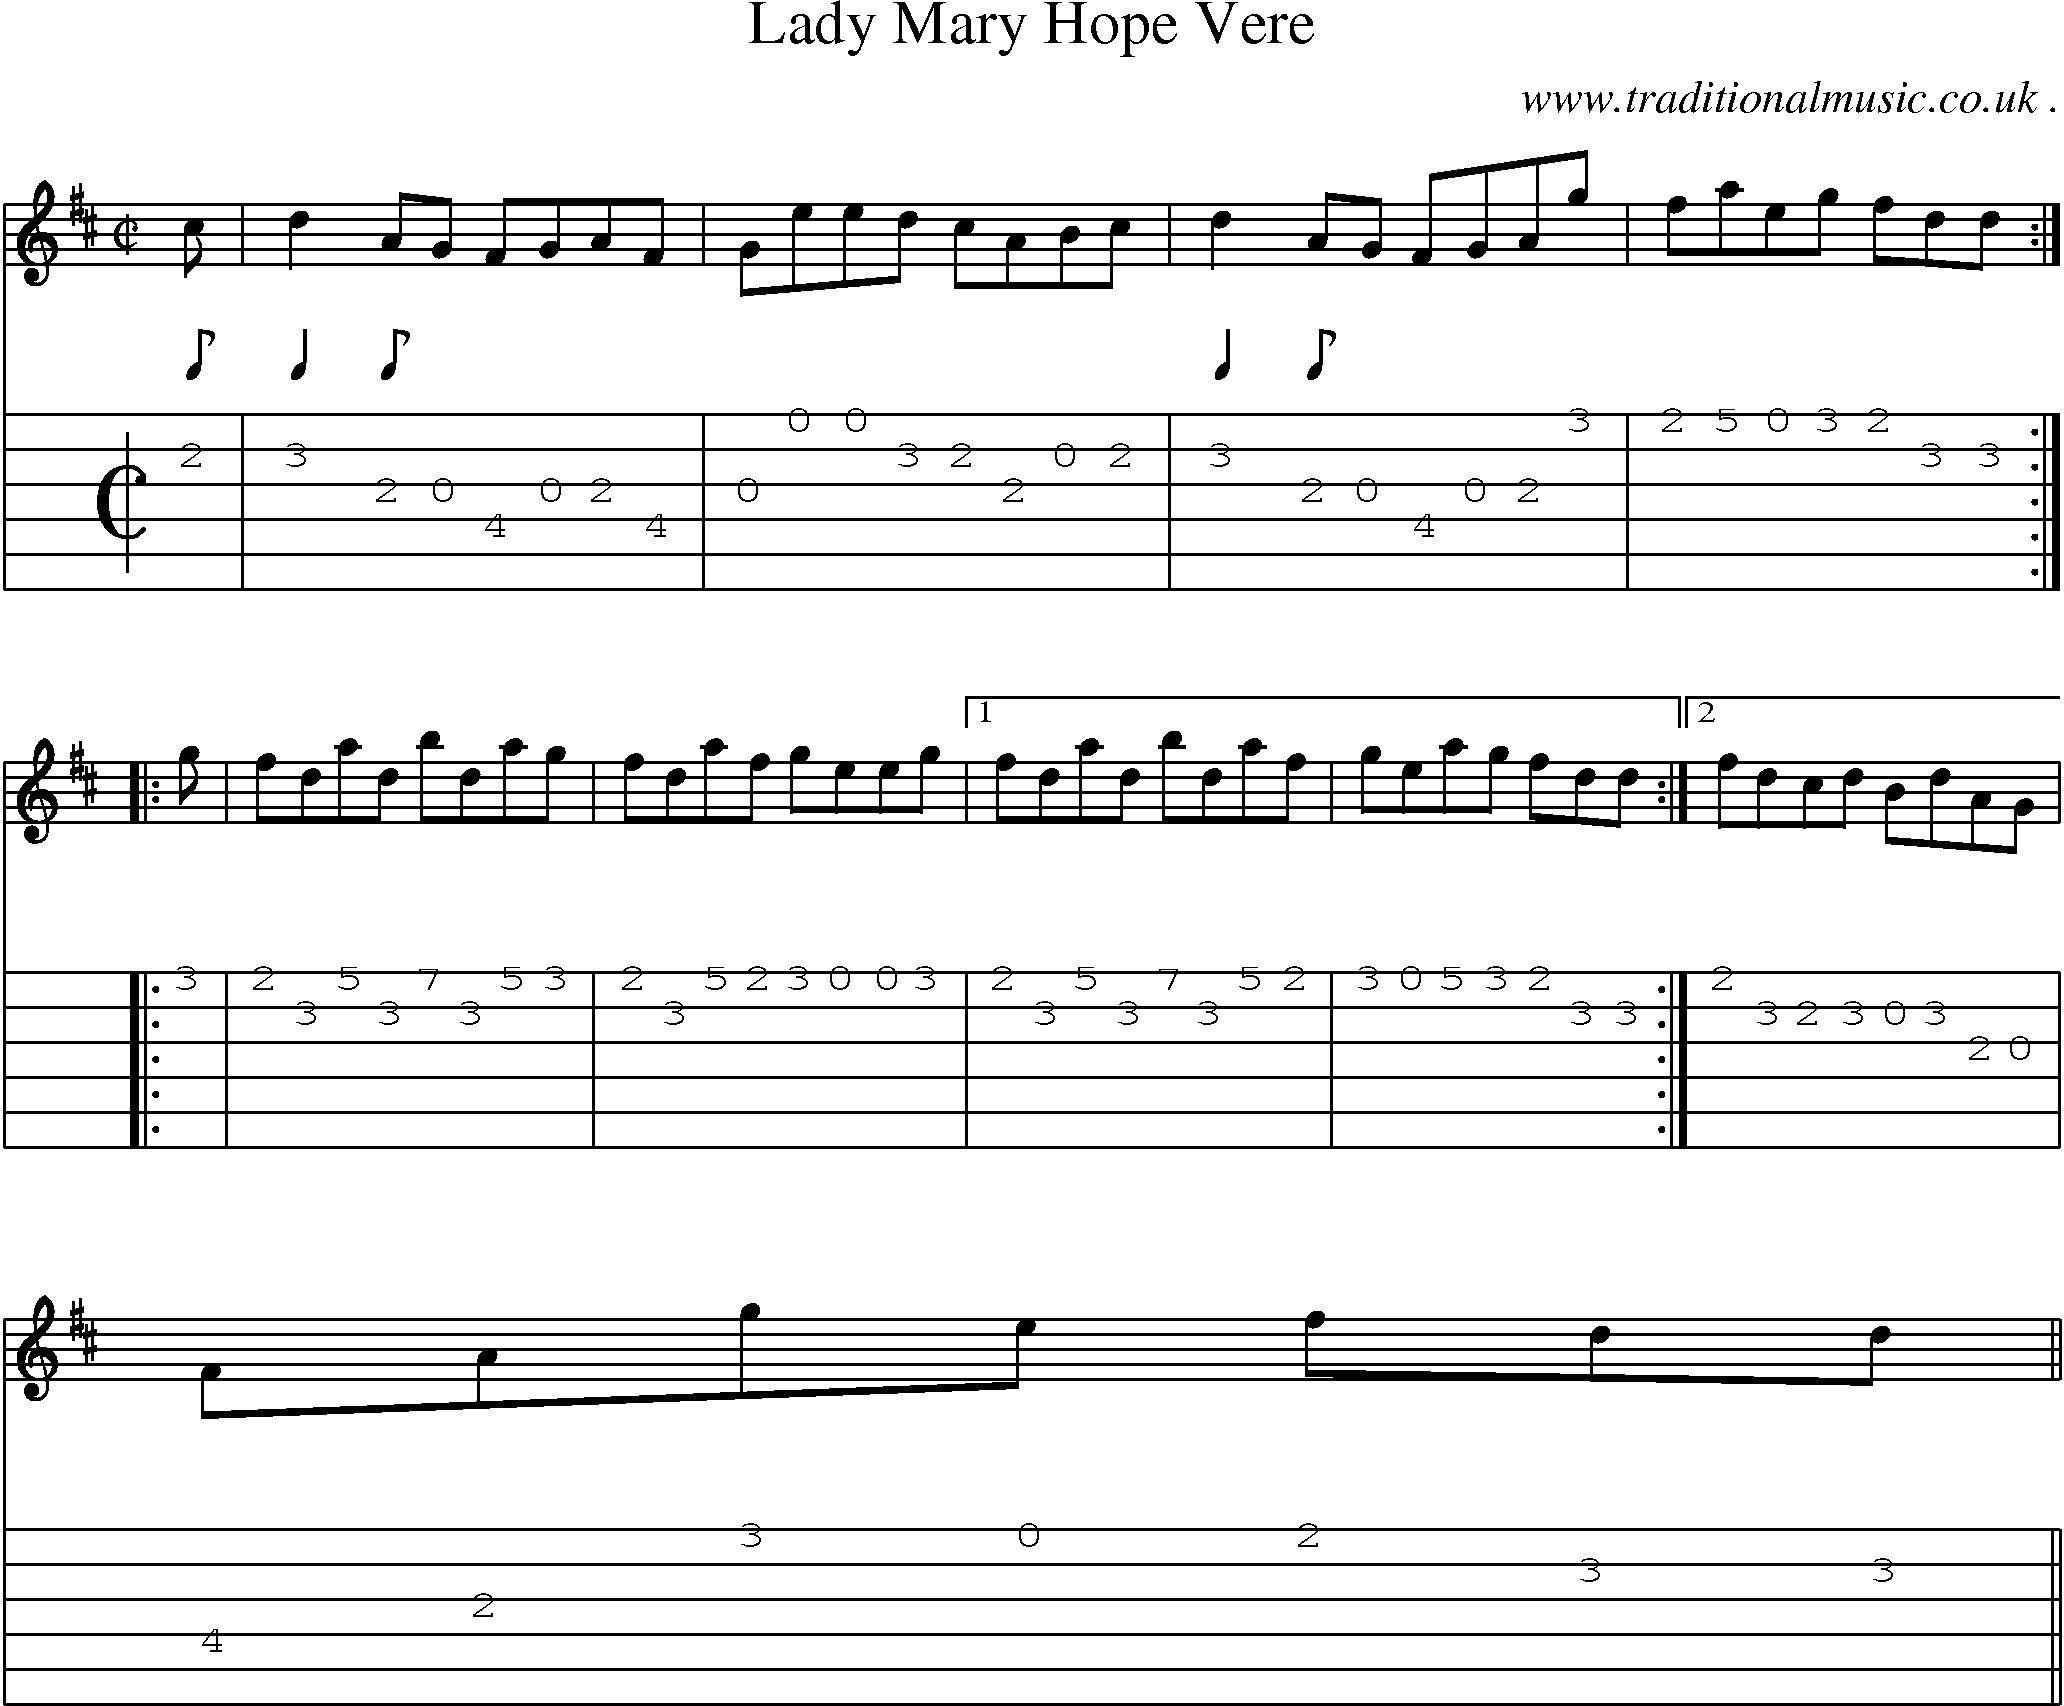 Sheet-music  score, Chords and Guitar Tabs for Lady Mary Hope Vere